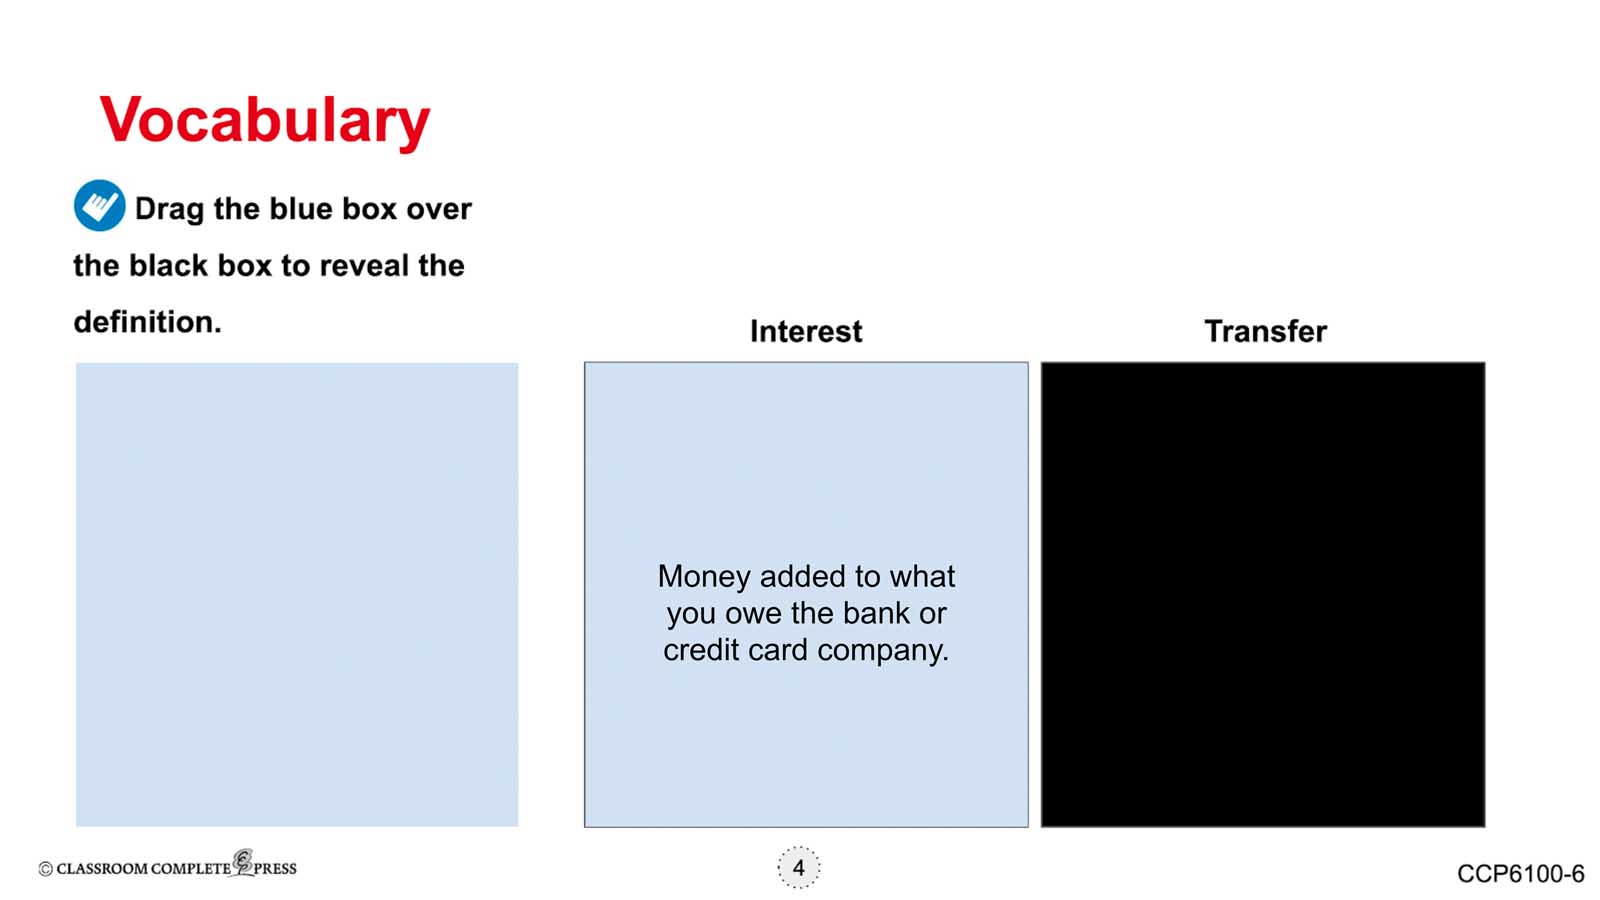 Daily Marketplace Skills: Forms of Payment - Google Slides Gr. 6-12 (SPED) - eBook